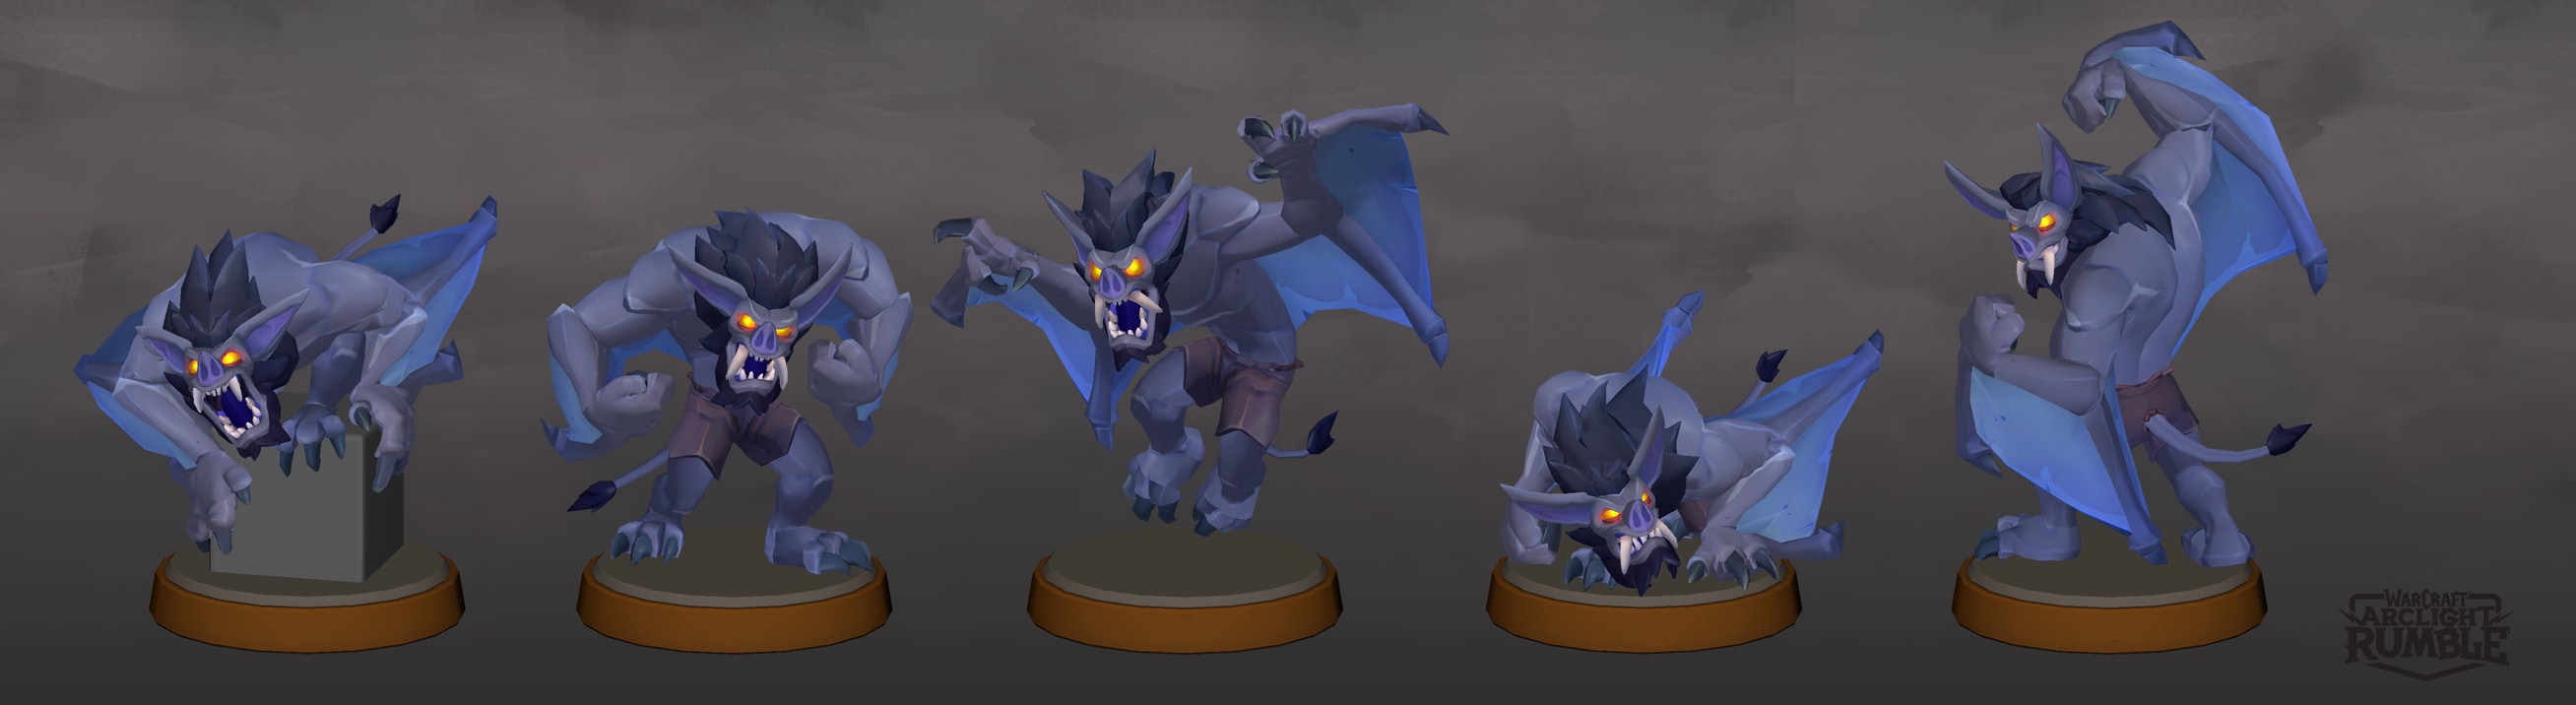 Gargoyle Mini in five different poses-Crouching on an Object, Flexing, Hovering,Crouching Low to the Ground,and Flexing While the Torso Faces Forward 